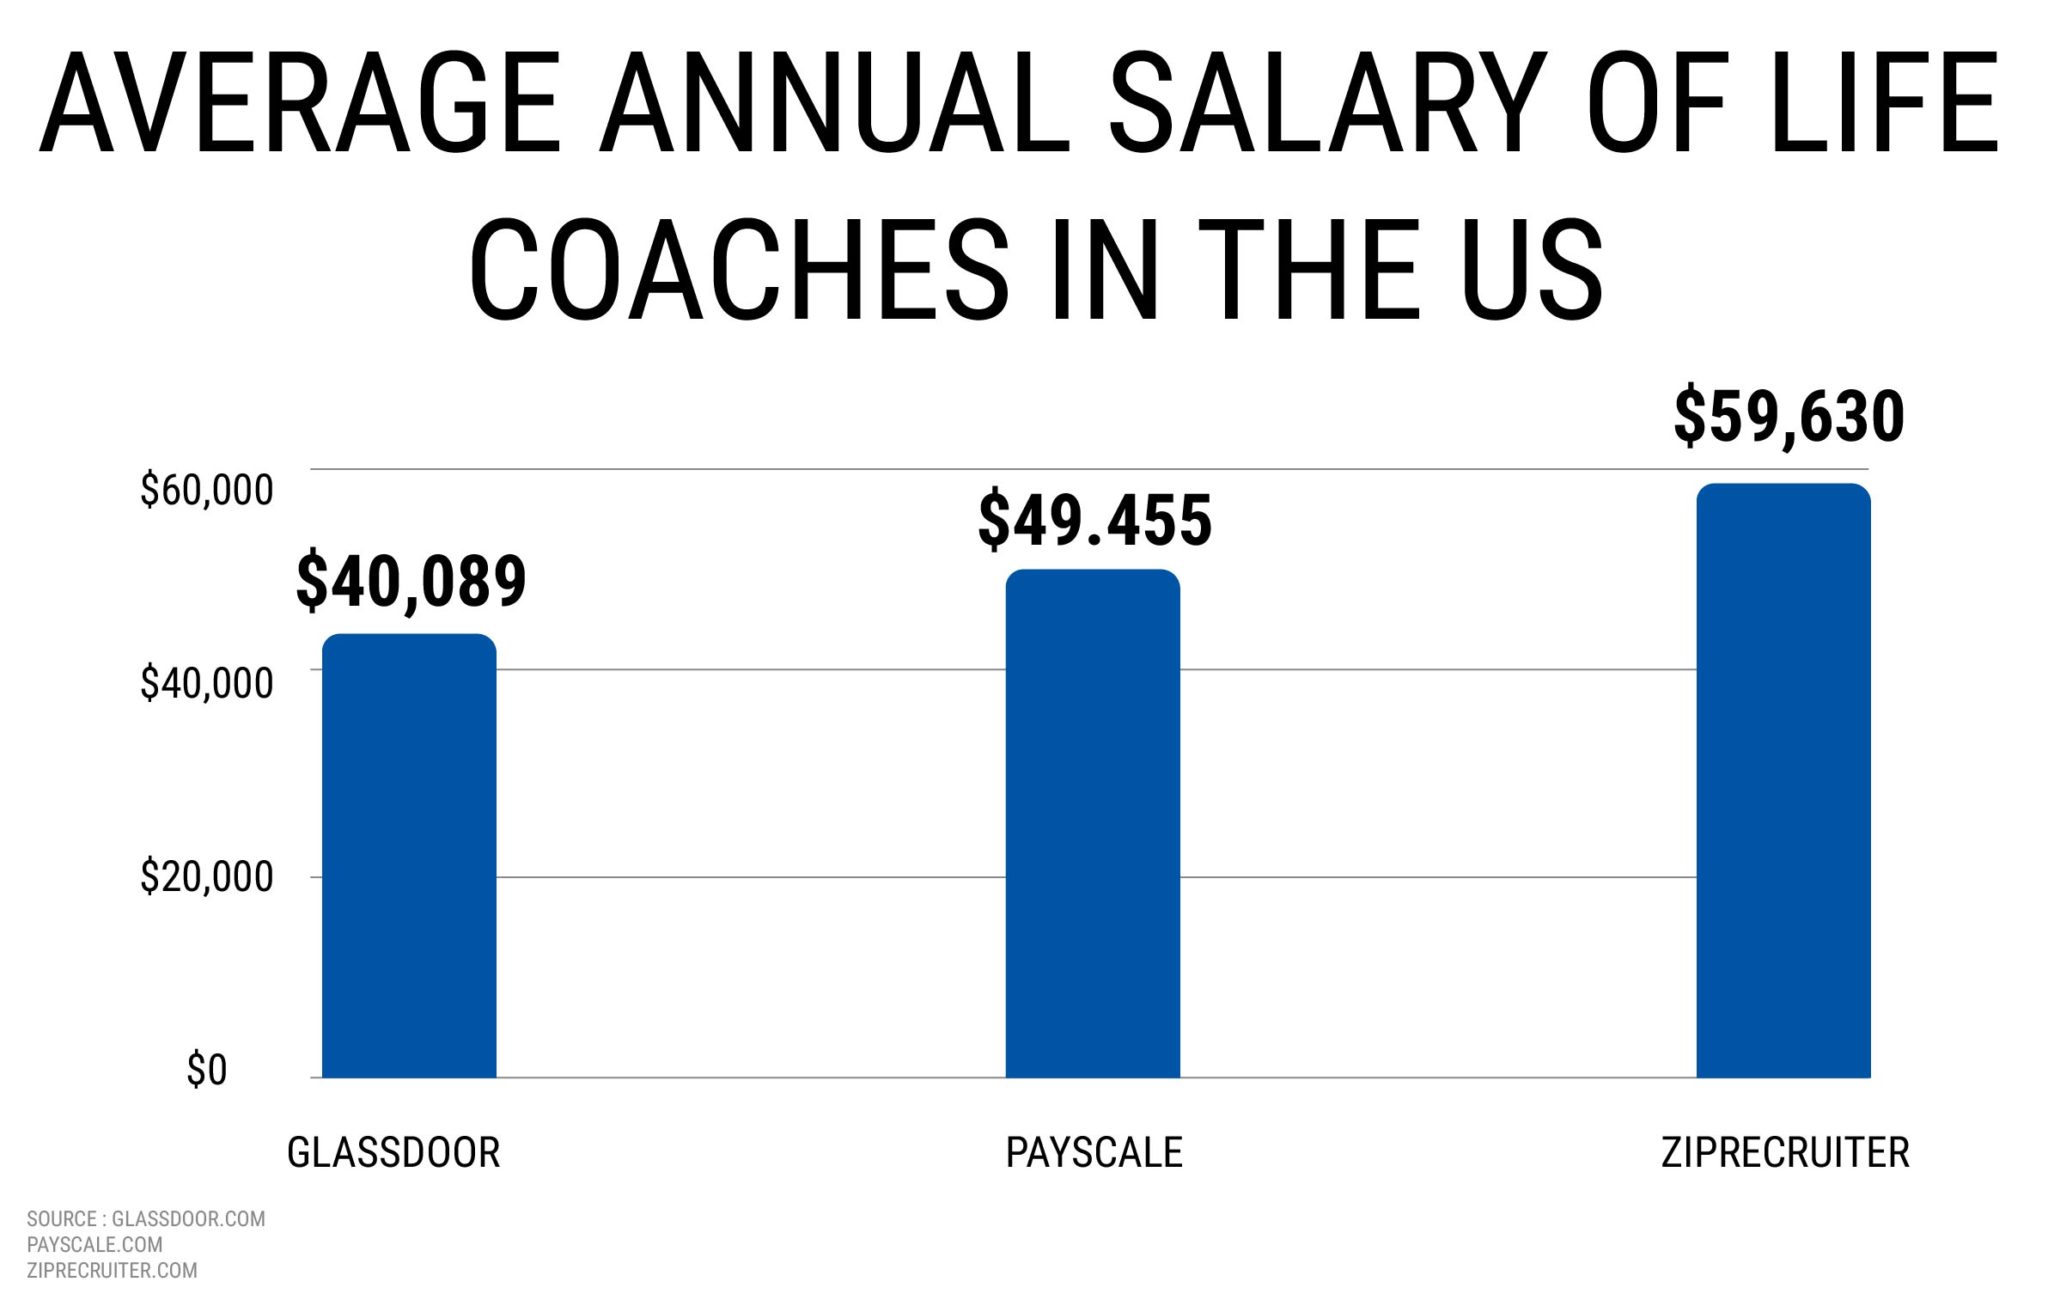 AVERAGE ANNUAL SALARY OF LIFE COACHES IN THE US